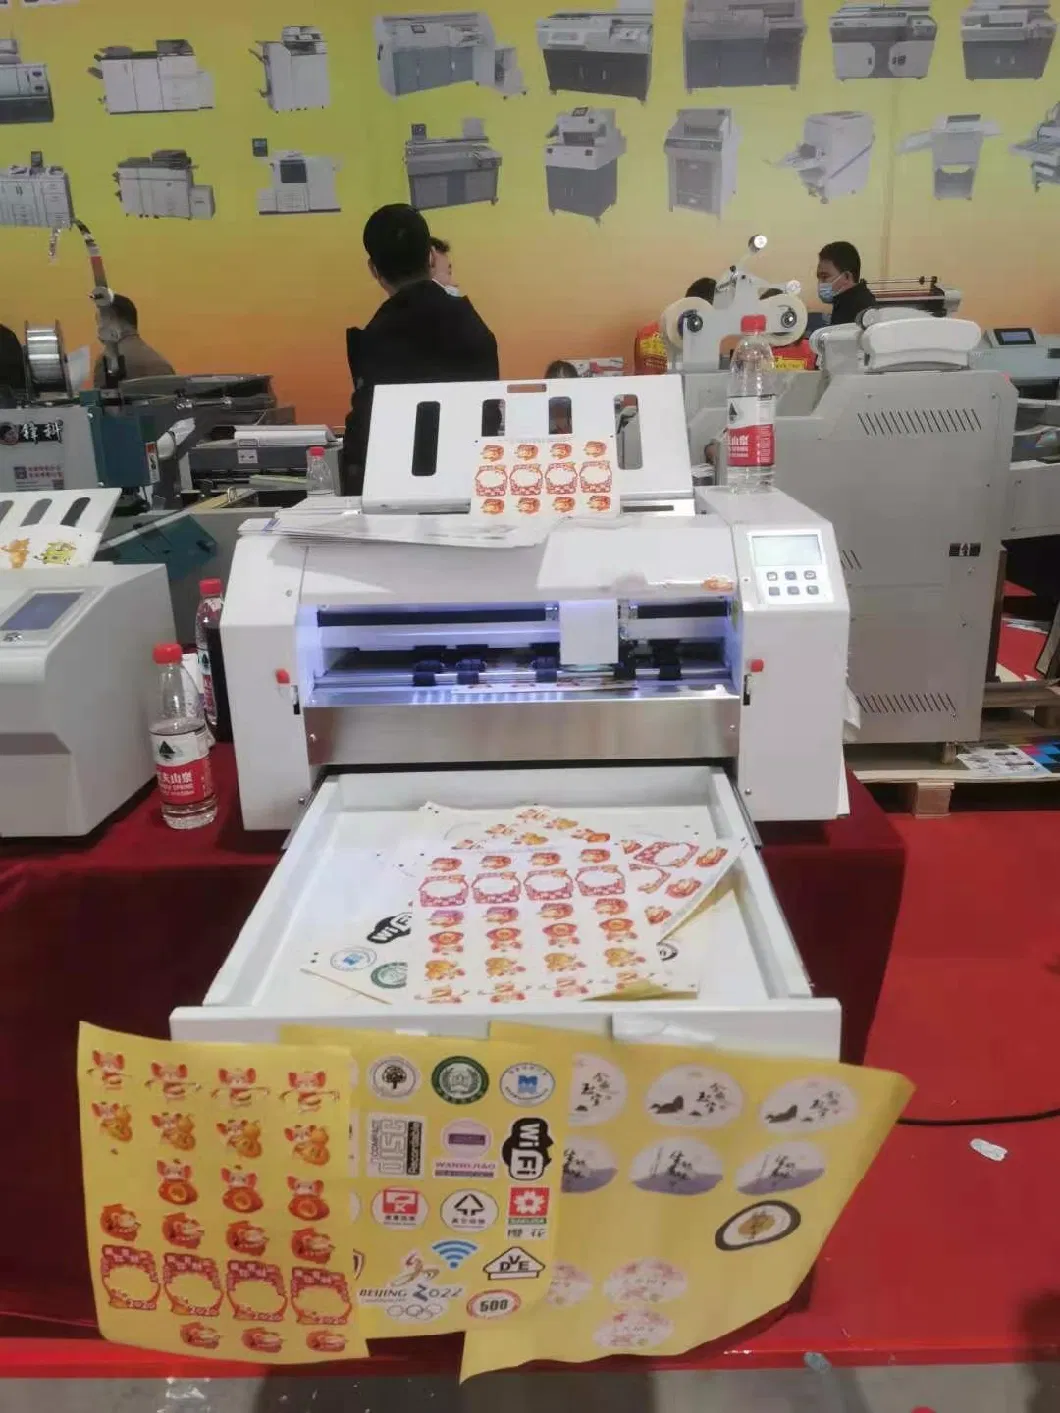 Small Exquisite Products/Custom Style/Personalized Label Cutter Contour Cutting Machine